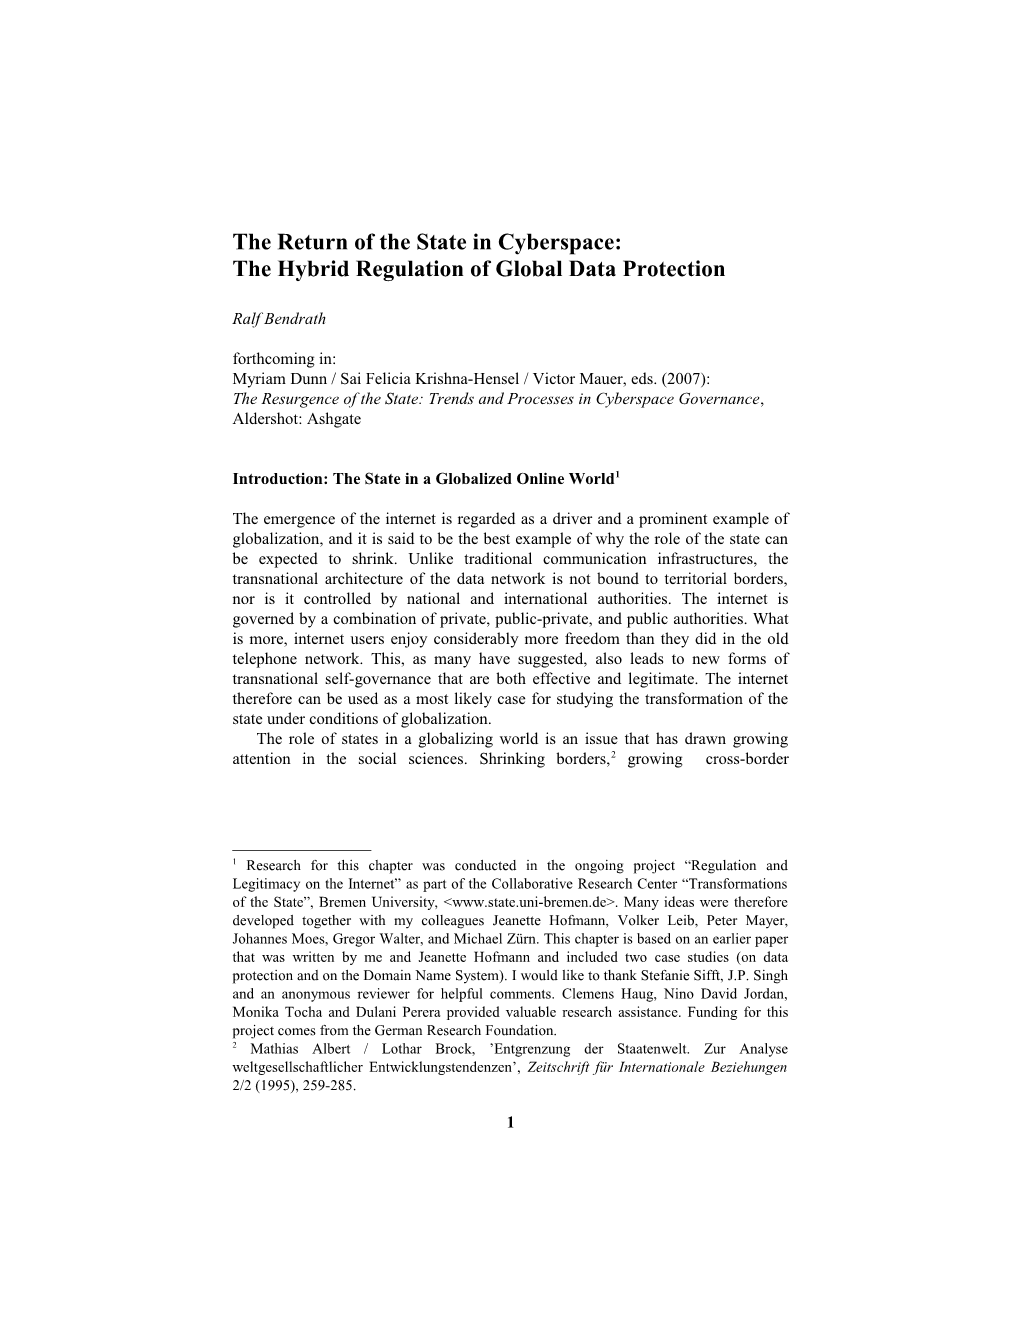 The Return of the State in Cyberspace: the Hybrid Regulation of Global Data Protection